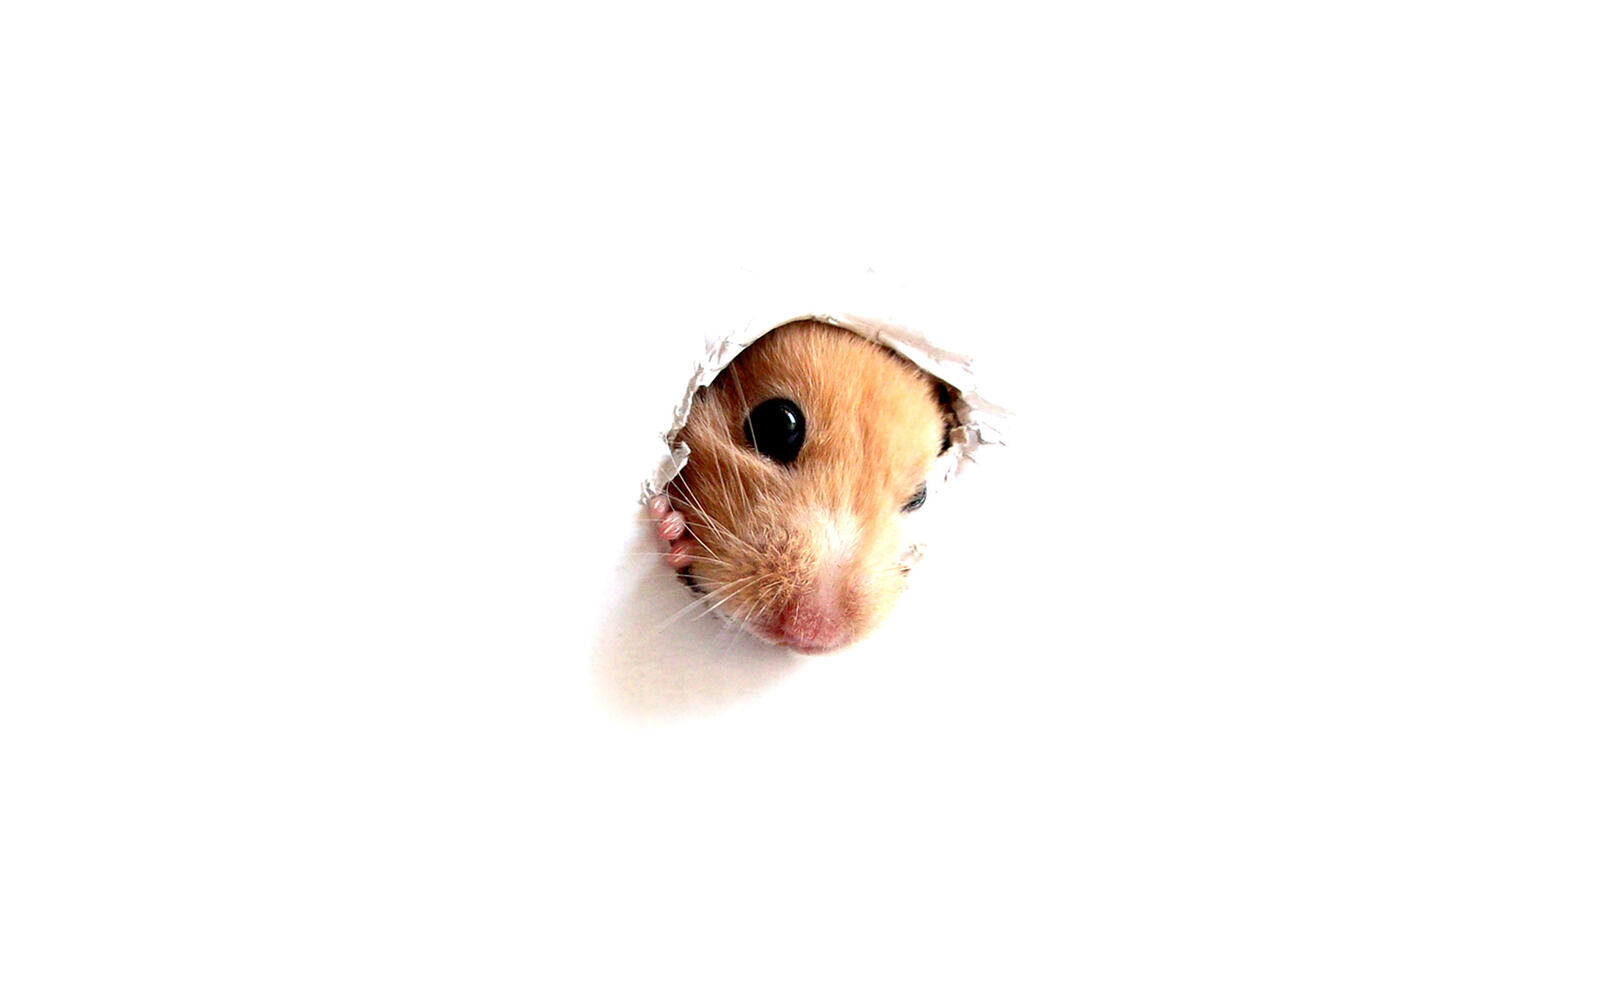 Wallpapers hamster rodent photo on the desktop